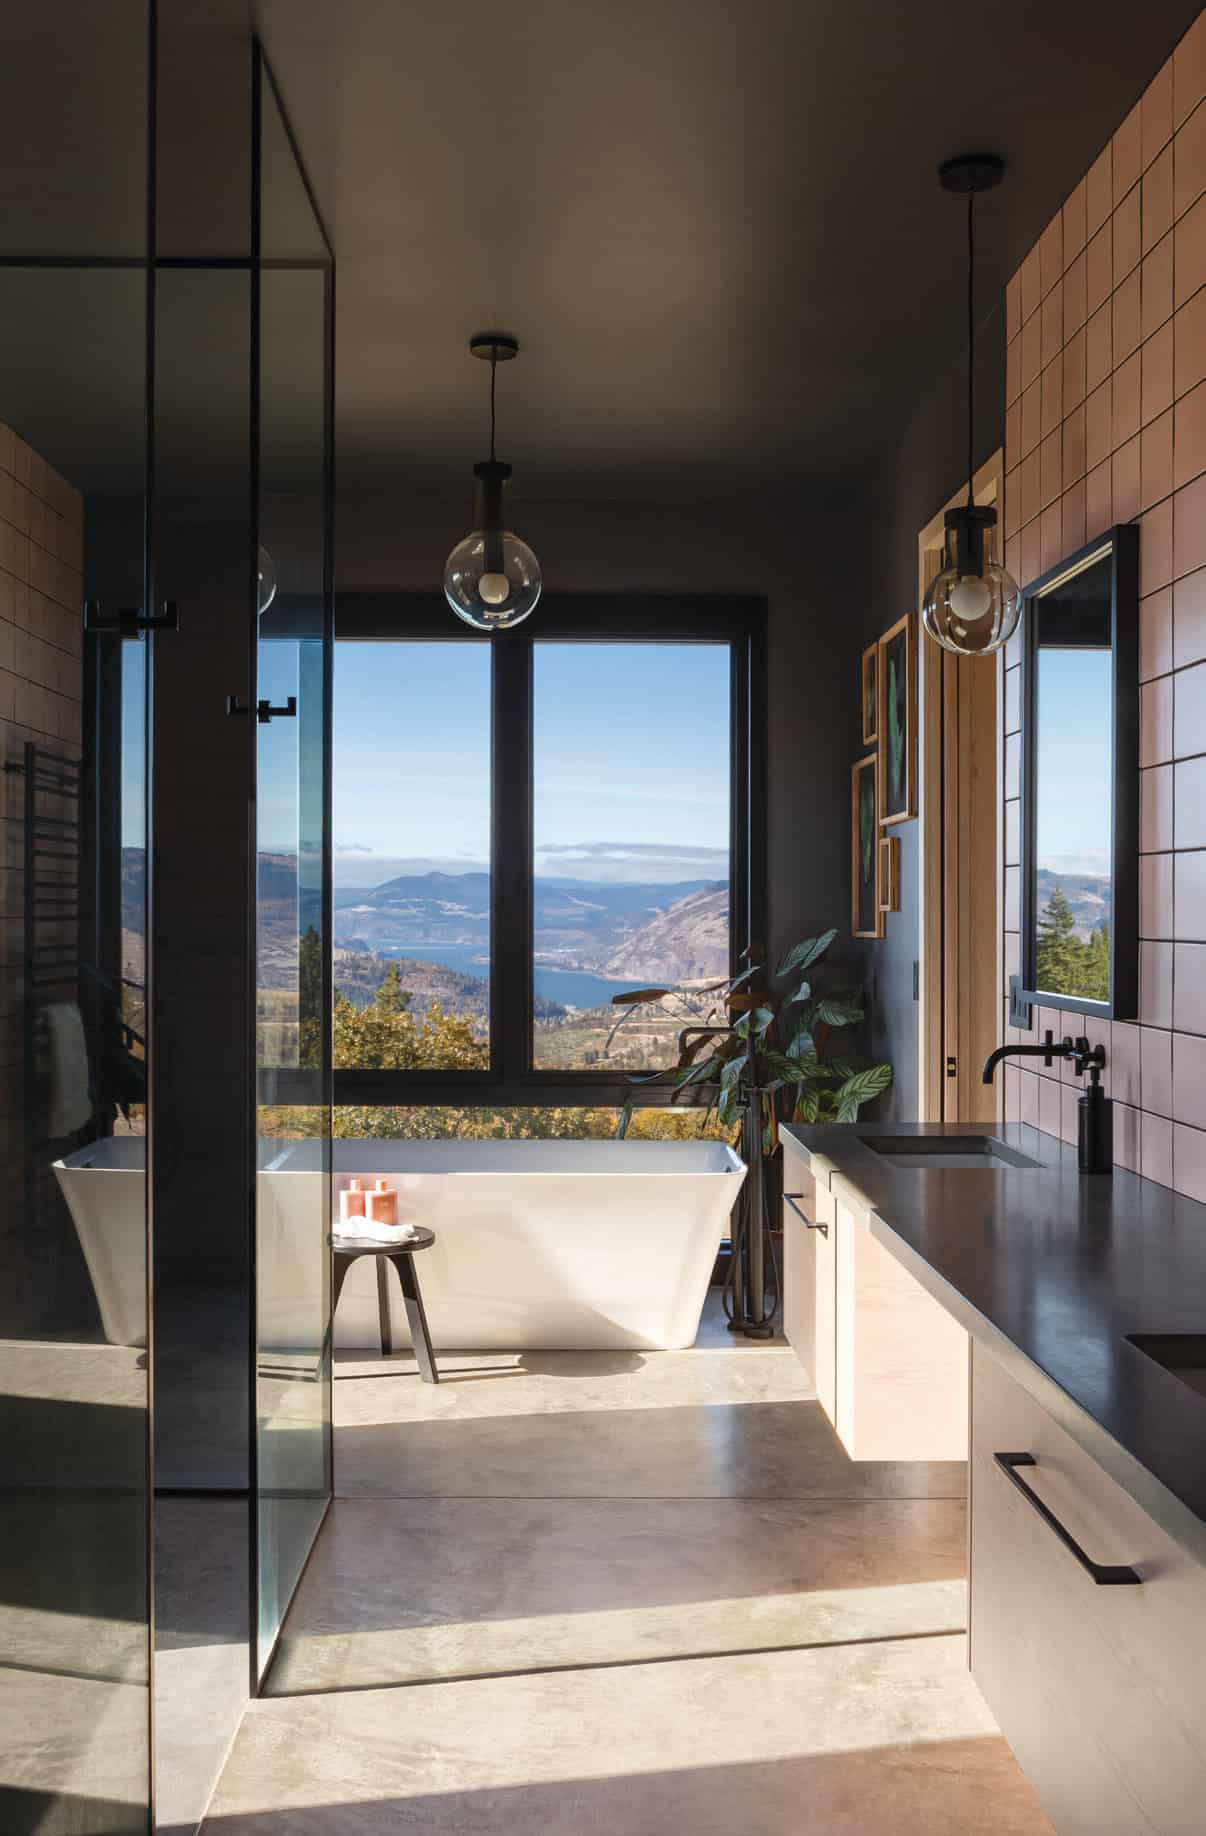 Vistas of the Gorge from the bath are the crowning achievement of the home.